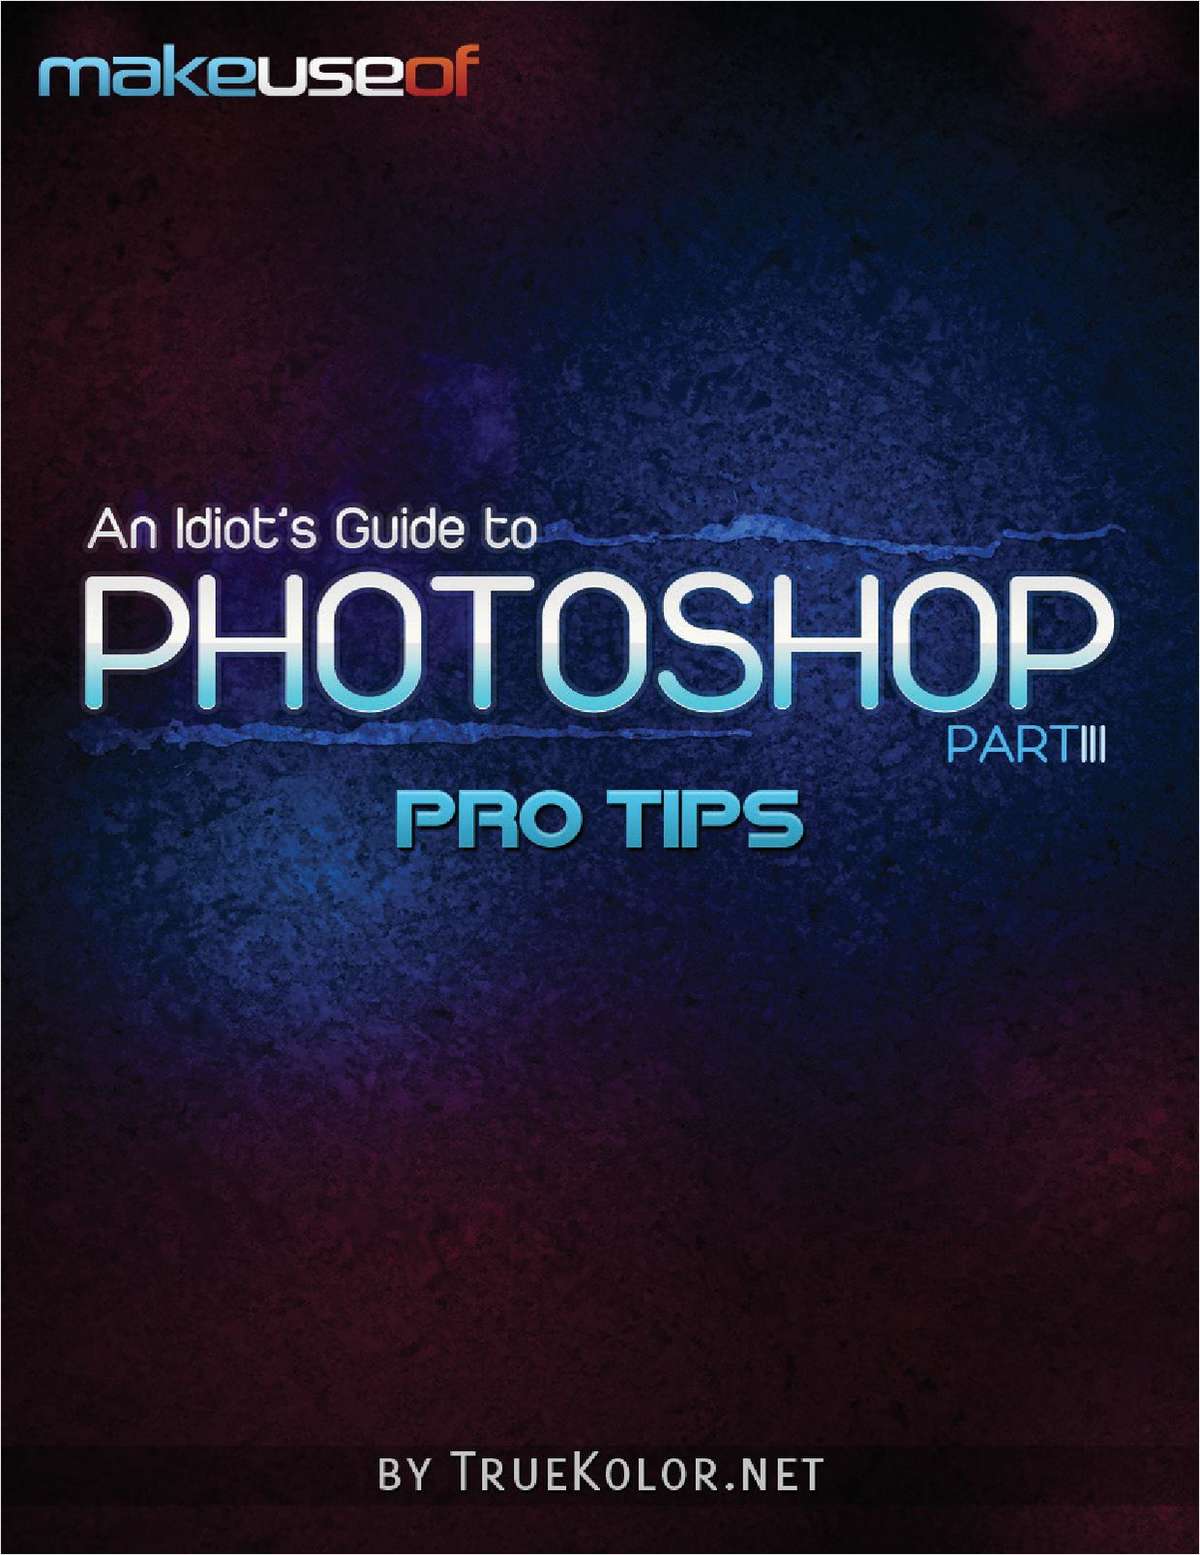 An Idiot's Guide to Photoshop, Part 3